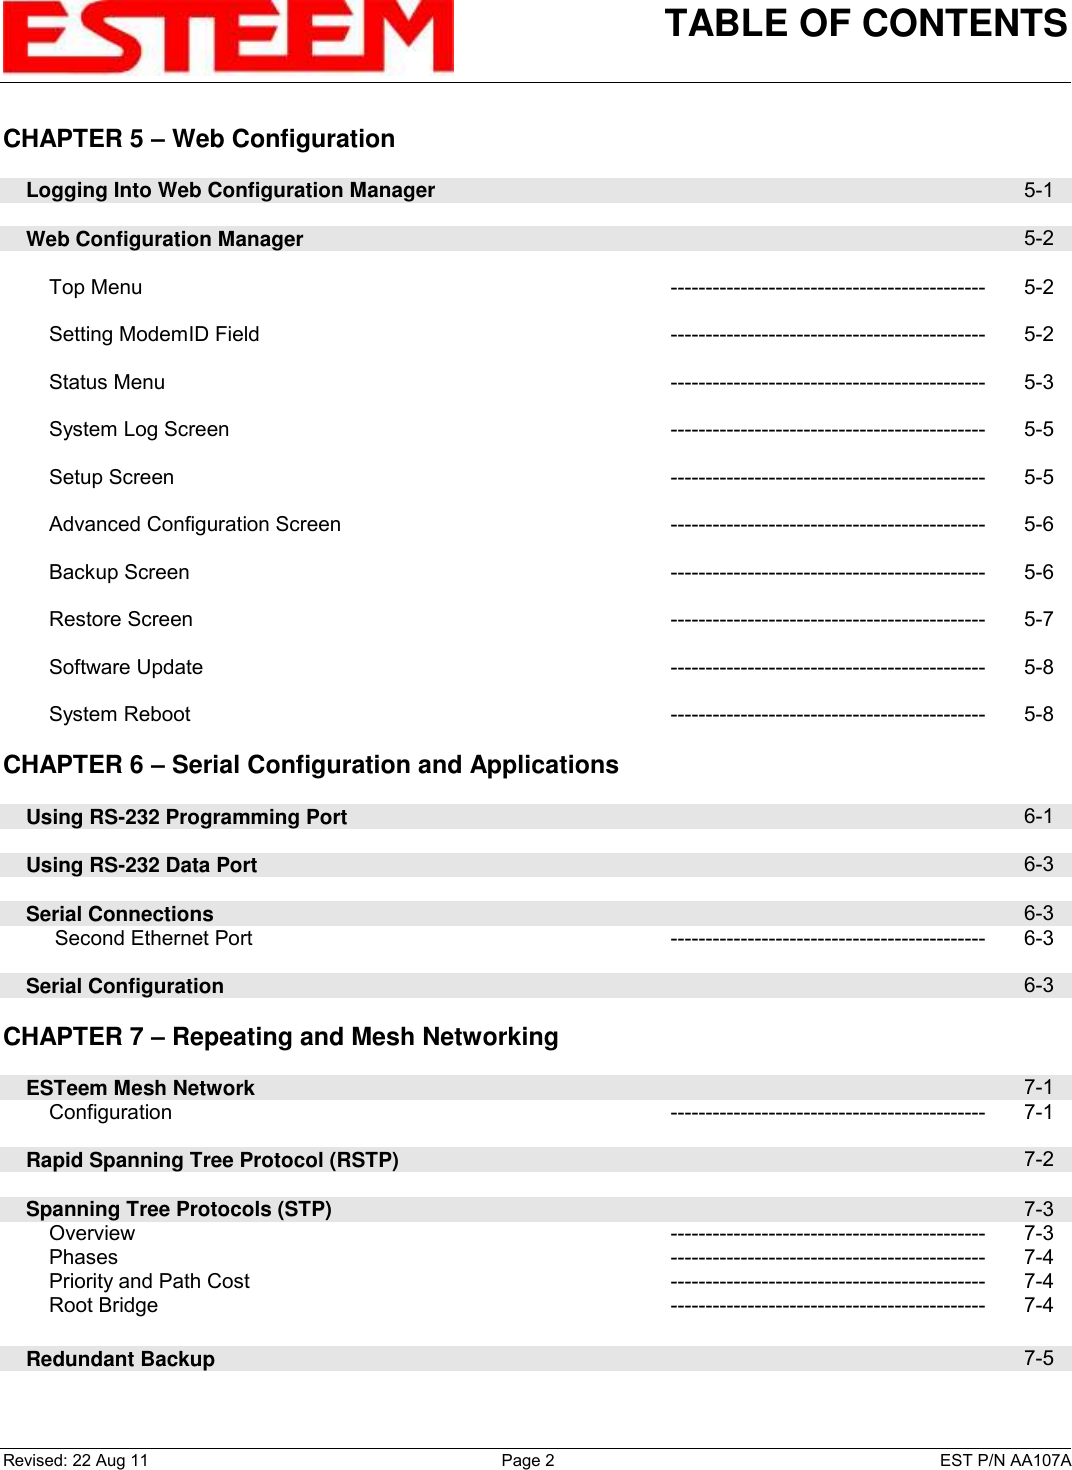 TABLE OF CONTENTS    Revised: 22 Aug 11  Page 2  EST P/N AA107A CHAPTER 5 – Web Configuration          Logging Into Web Configuration Manager  5-1        Web Configuration Manager  5-2            Top Menu --------------------------------------------- 5-2            Setting ModemID Field --------------------------------------------- 5-2            Status Menu --------------------------------------------- 5-3            System Log Screen --------------------------------------------- 5-5            Setup Screen --------------------------------------------- 5-5            Advanced Configuration Screen --------------------------------------------- 5-6            Backup Screen --------------------------------------------- 5-6            Restore Screen --------------------------------------------- 5-7            Software Update --------------------------------------------- 5-8            System Reboot --------------------------------------------- 5-8    CHAPTER 6 – Serial Configuration and Applications          Using RS-232 Programming Port  6-1        Using RS-232 Data Port  6-3        Serial Connections  6-3          Second Ethernet Port --------------------------------------------- 6-3        Serial Configuration  6-3    CHAPTER 7 – Repeating and Mesh Networking          ESTeem Mesh Network  7-1         Configuration --------------------------------------------- 7-1        Rapid Spanning Tree Protocol (RSTP)  7-2        Spanning Tree Protocols (STP)  7-3         Overview --------------------------------------------- 7-3         Phases --------------------------------------------- 7-4         Priority and Path Cost --------------------------------------------- 7-4         Root Bridge --------------------------------------------- 7-4        Redundant Backup  7-5    